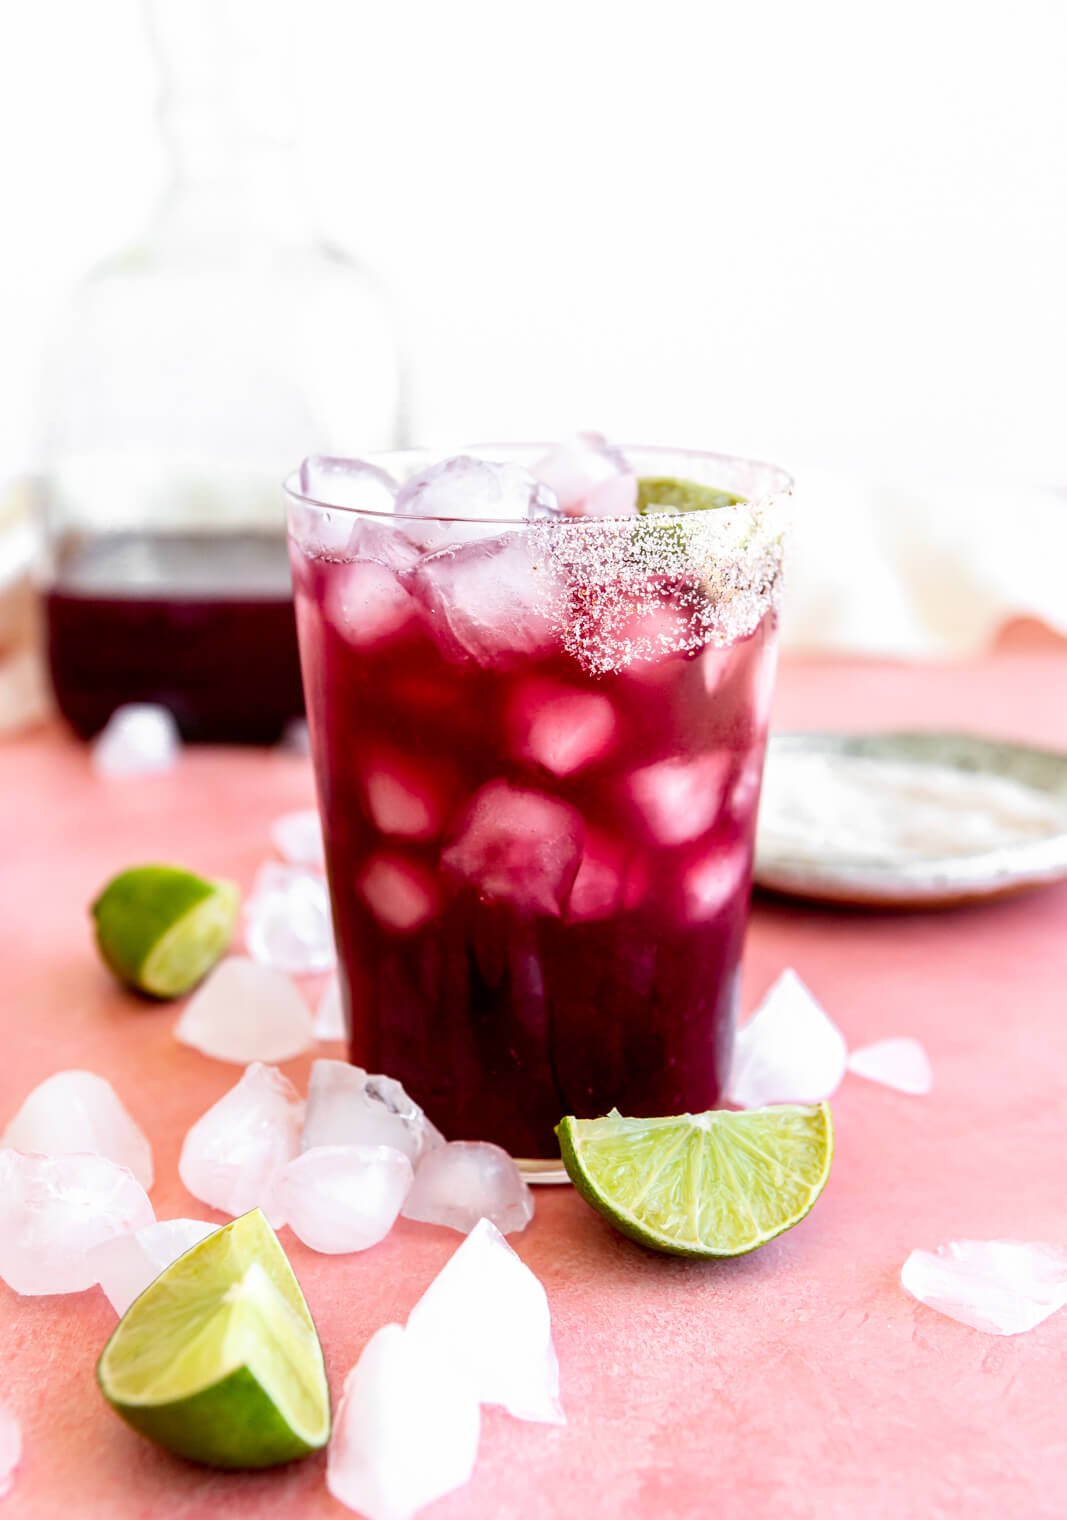 Wine marg on ice in a glass half lined with salt with lime wedges and ice cubes on the table around the glass.